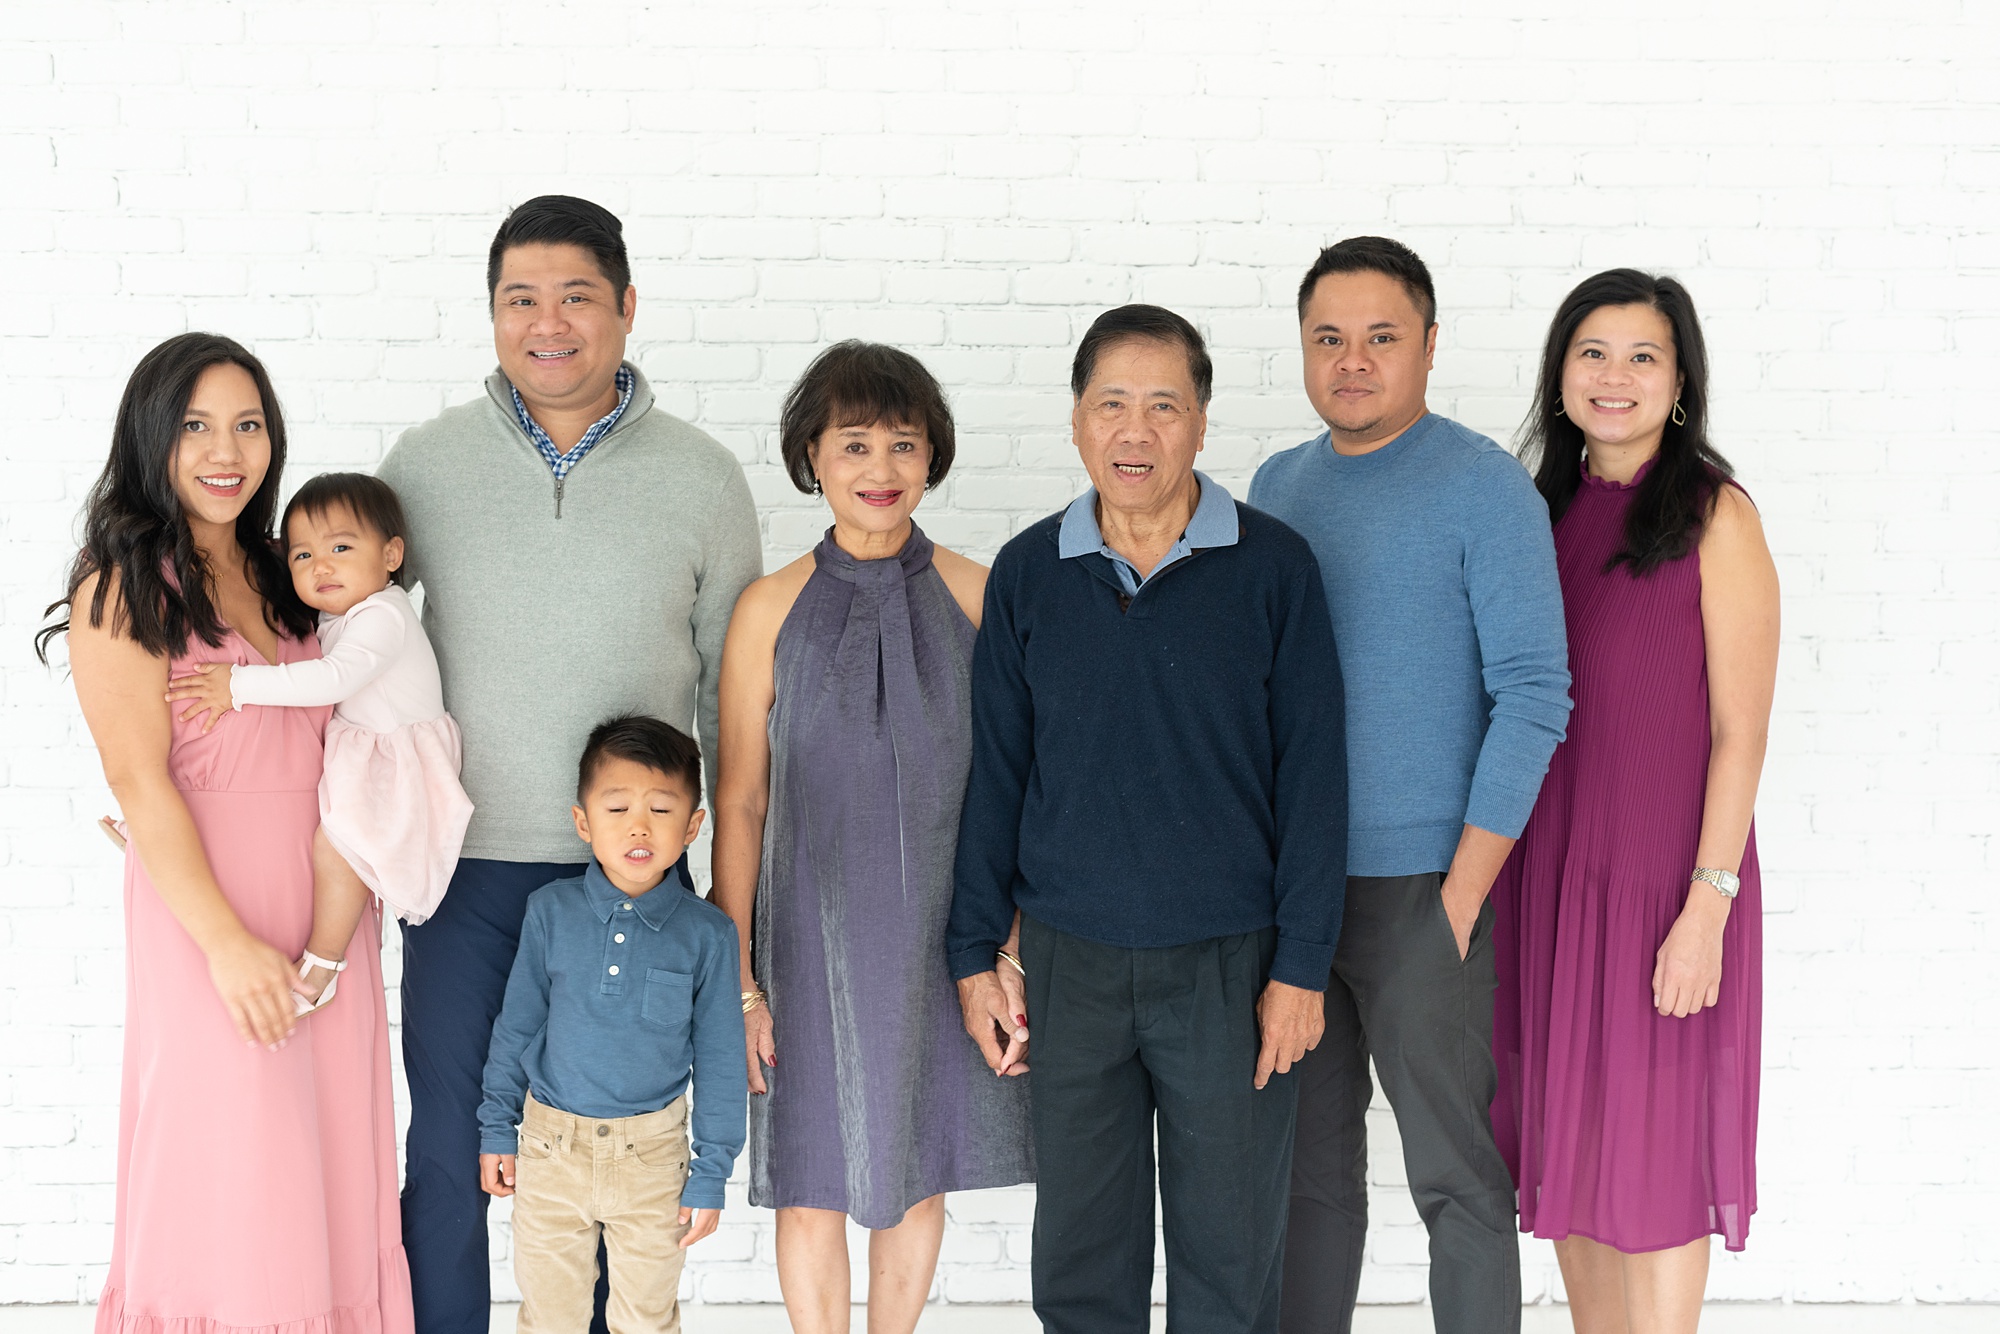 extend family poses together during Plano TX family photos 